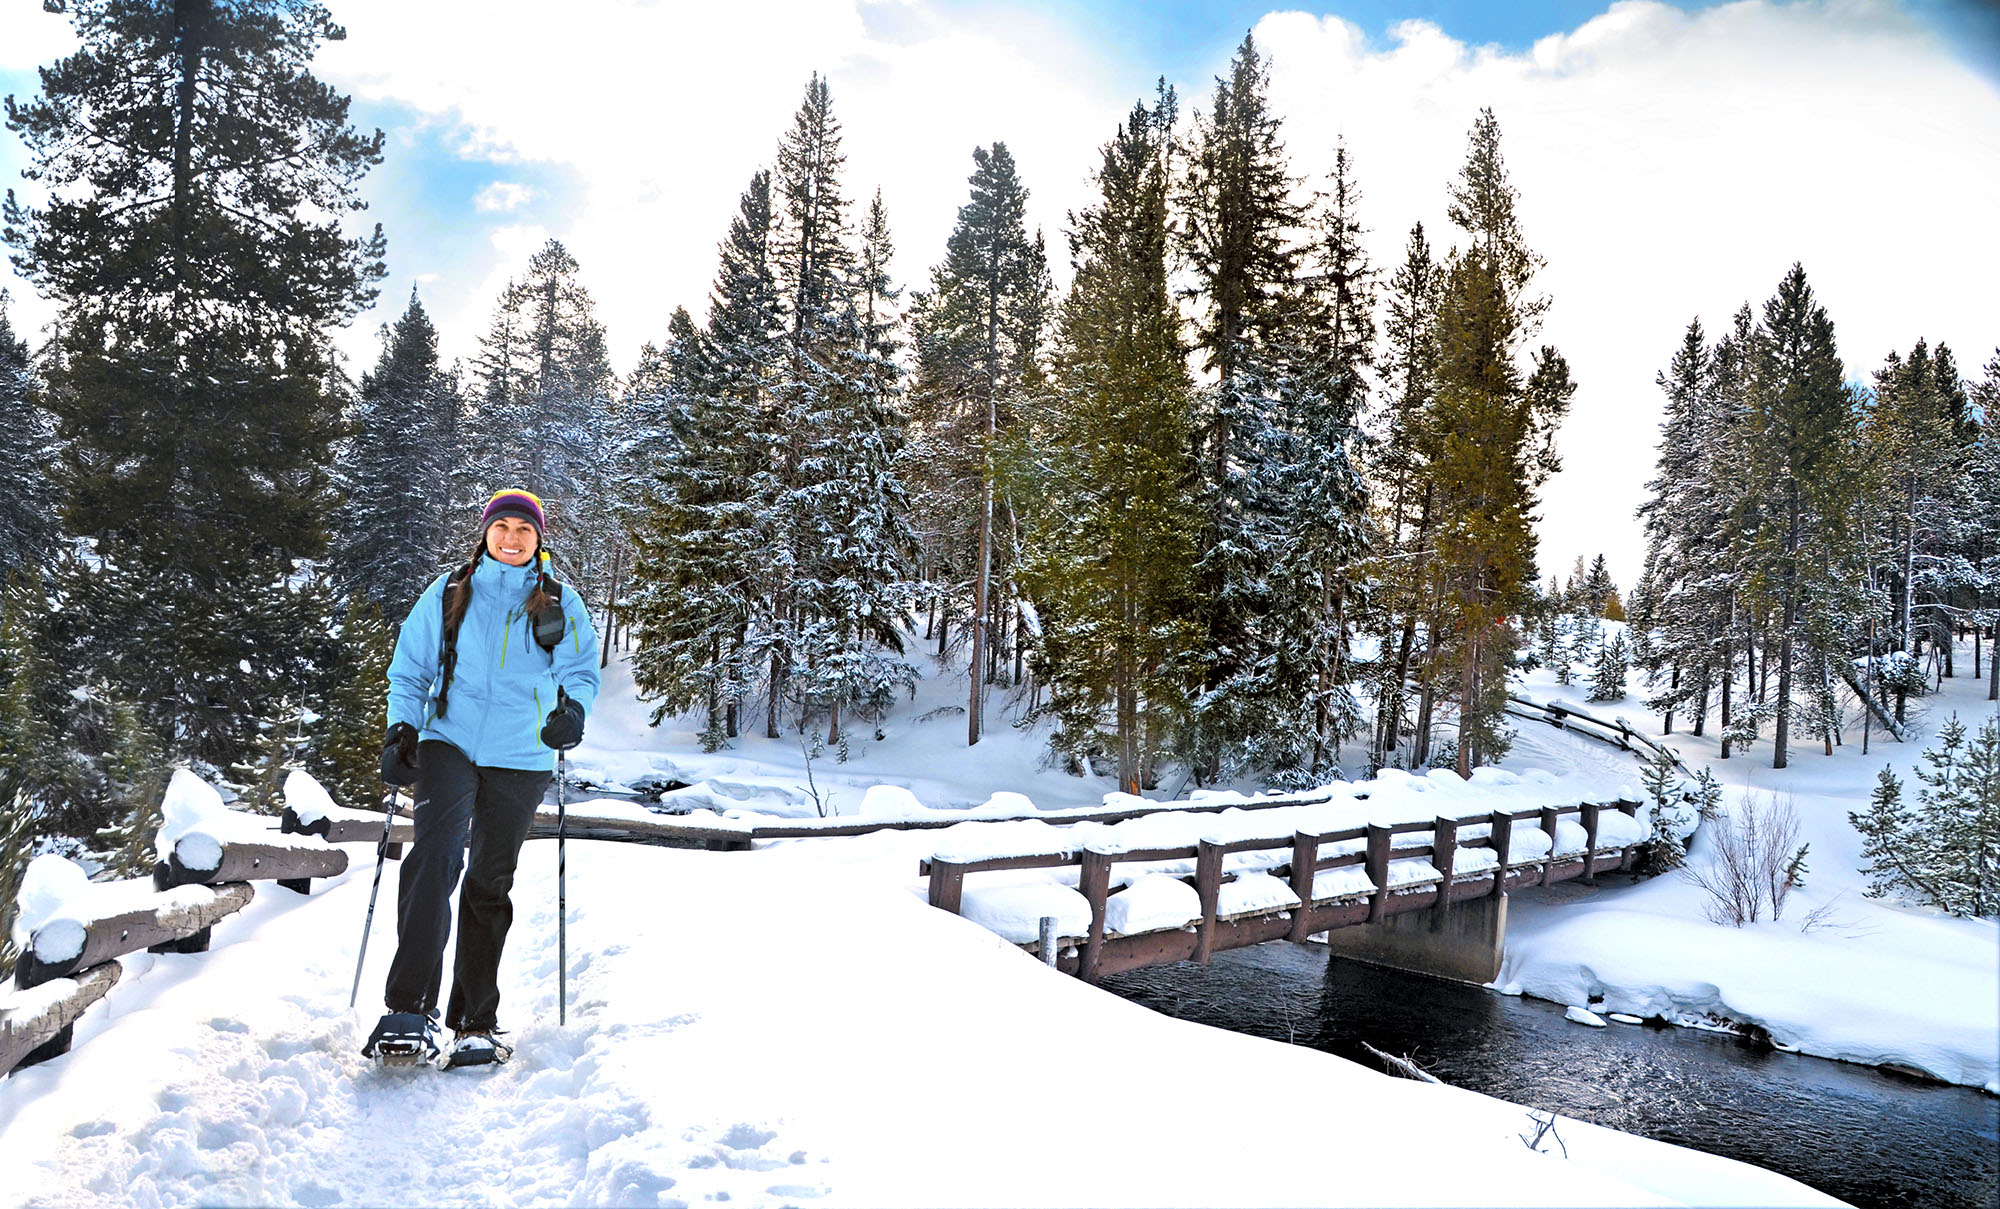 Backroads guest enjoys an active winter vacation in Yellowstone National Park